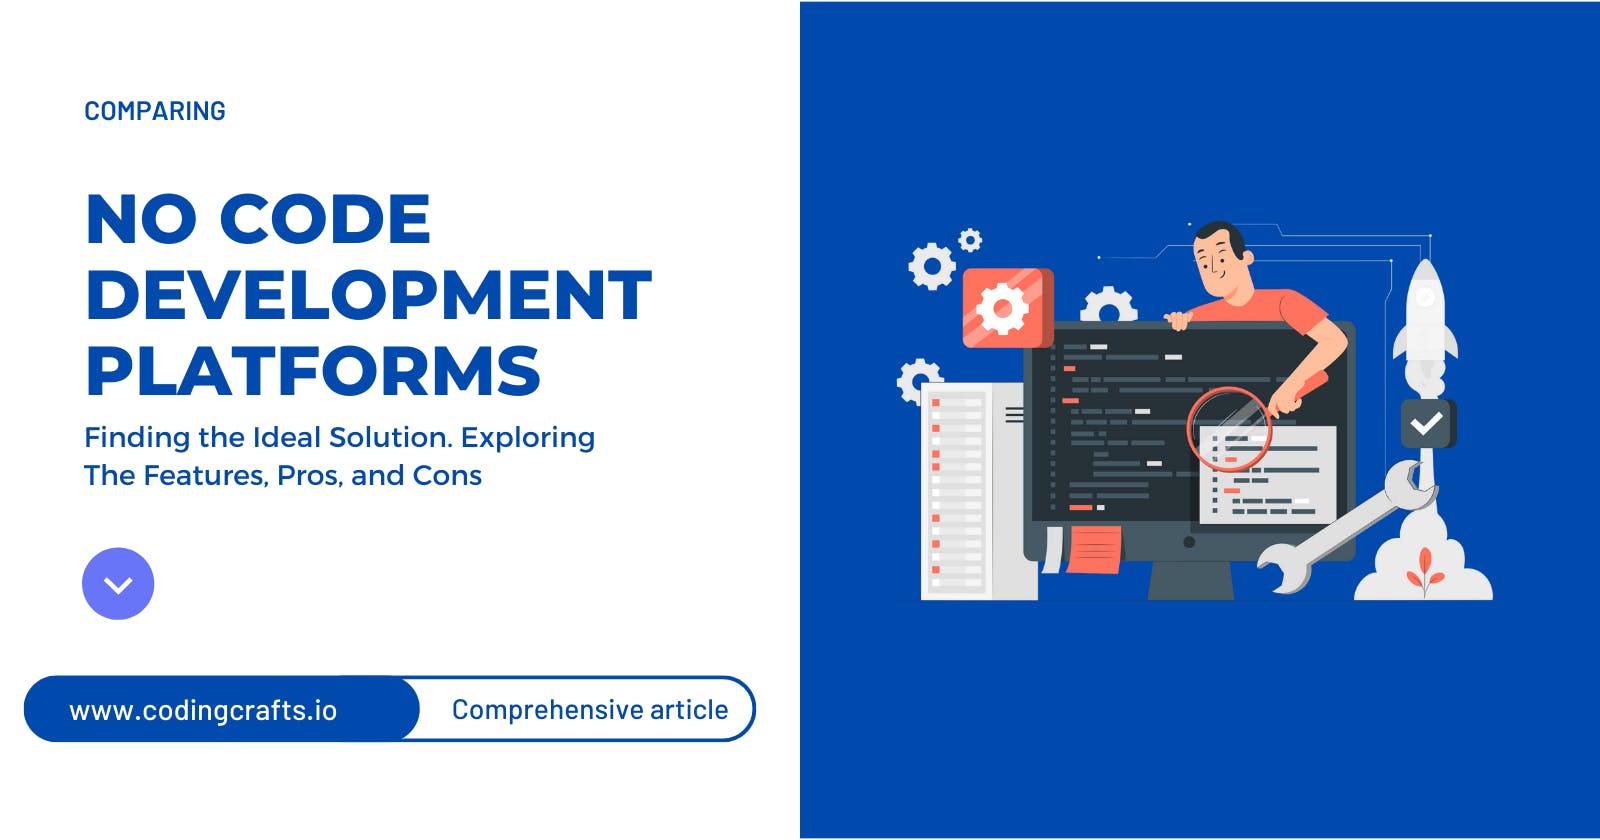 Comparing No Code Development Platforms: Finding the Ideal Solution